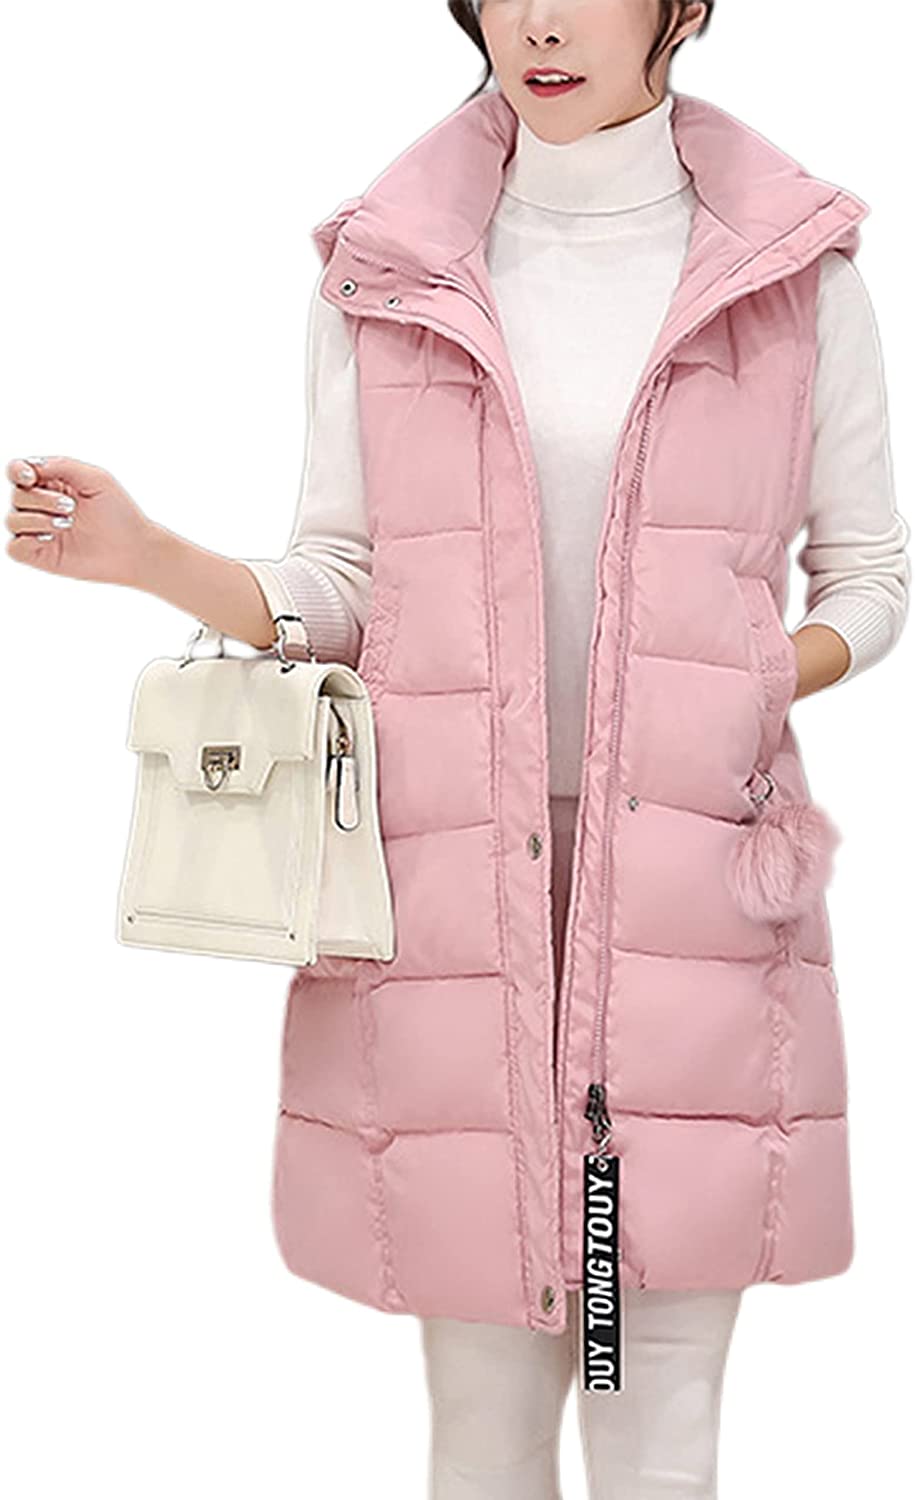 Tanming Women's Winter Cotton Padded Long Vest Coat Outerwear with Hood  Pockets | eBay